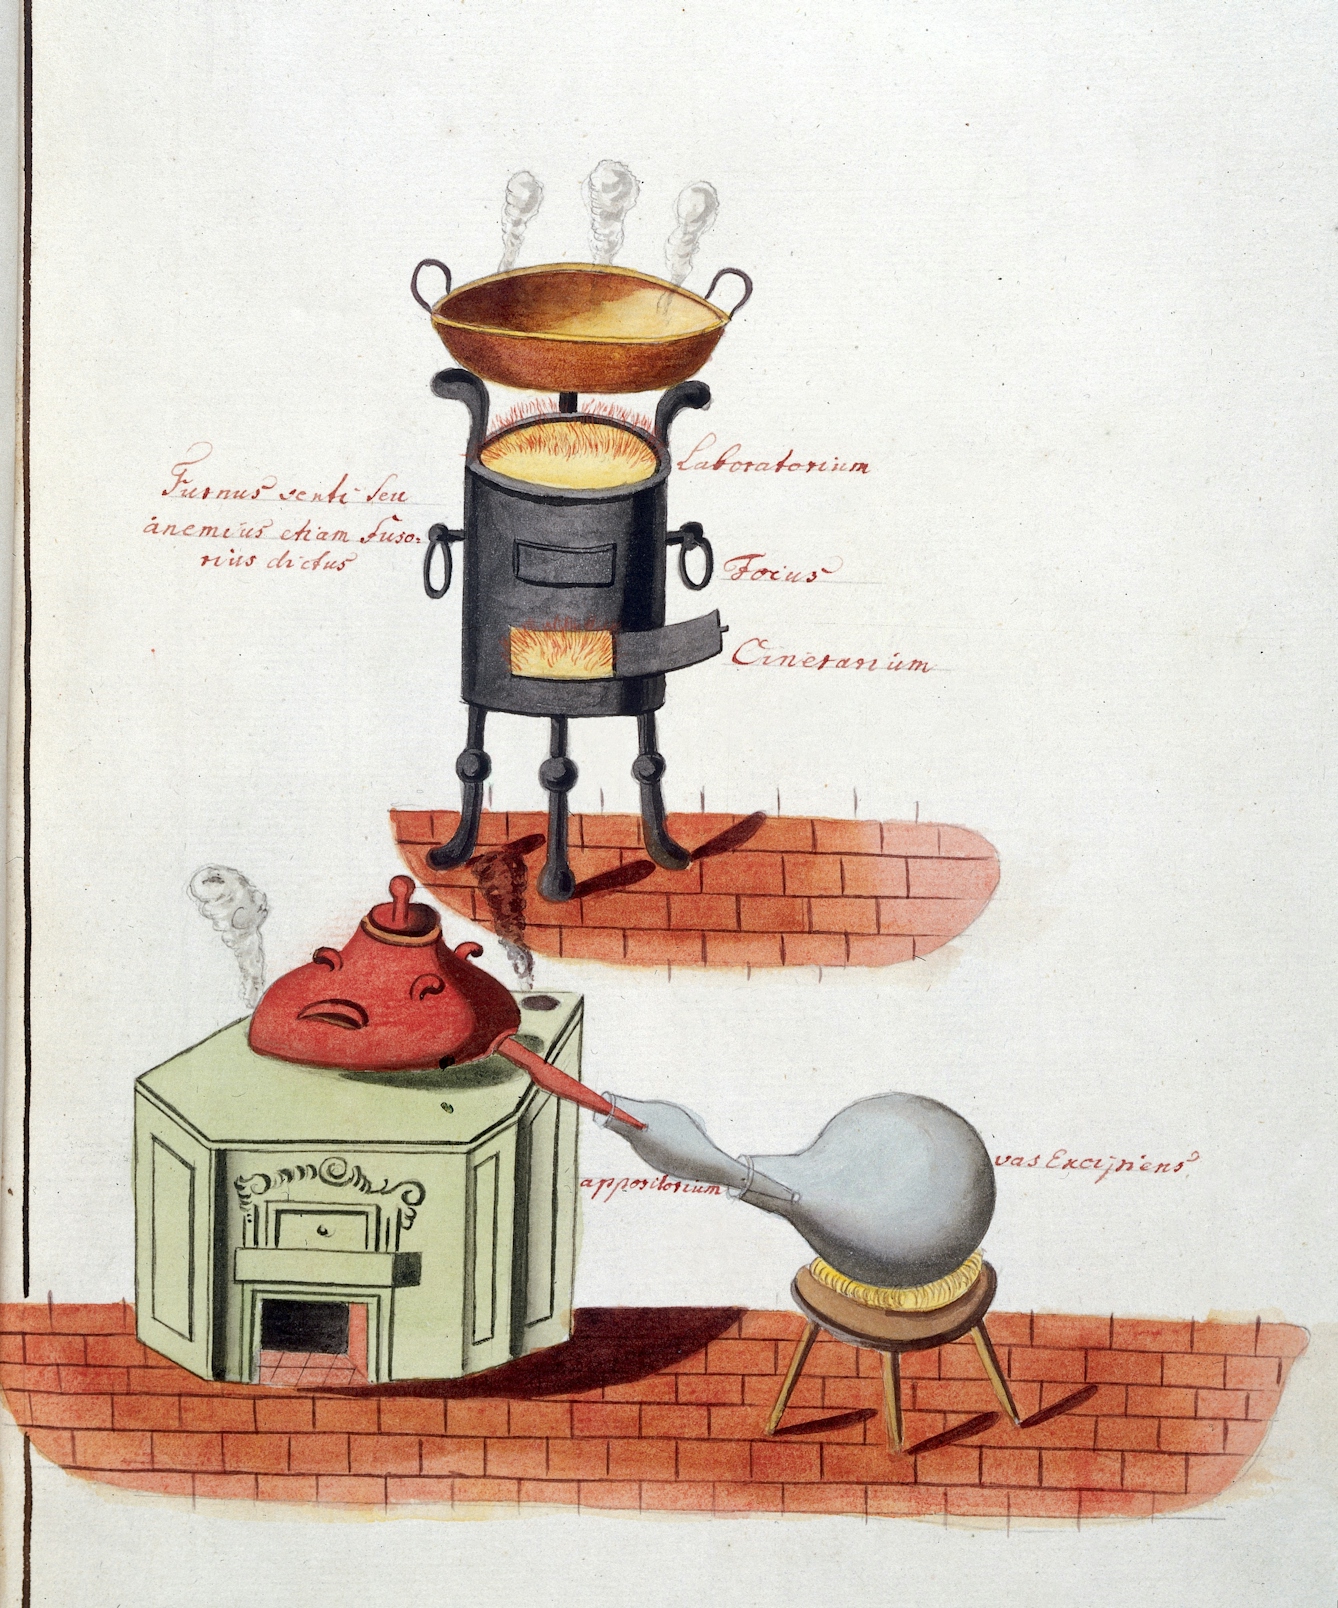 Alchemical apparatus, including a black stove blazing with fire with a bowl perched on top, and some sort of oven with a red jar leading to a glass receptacle. 